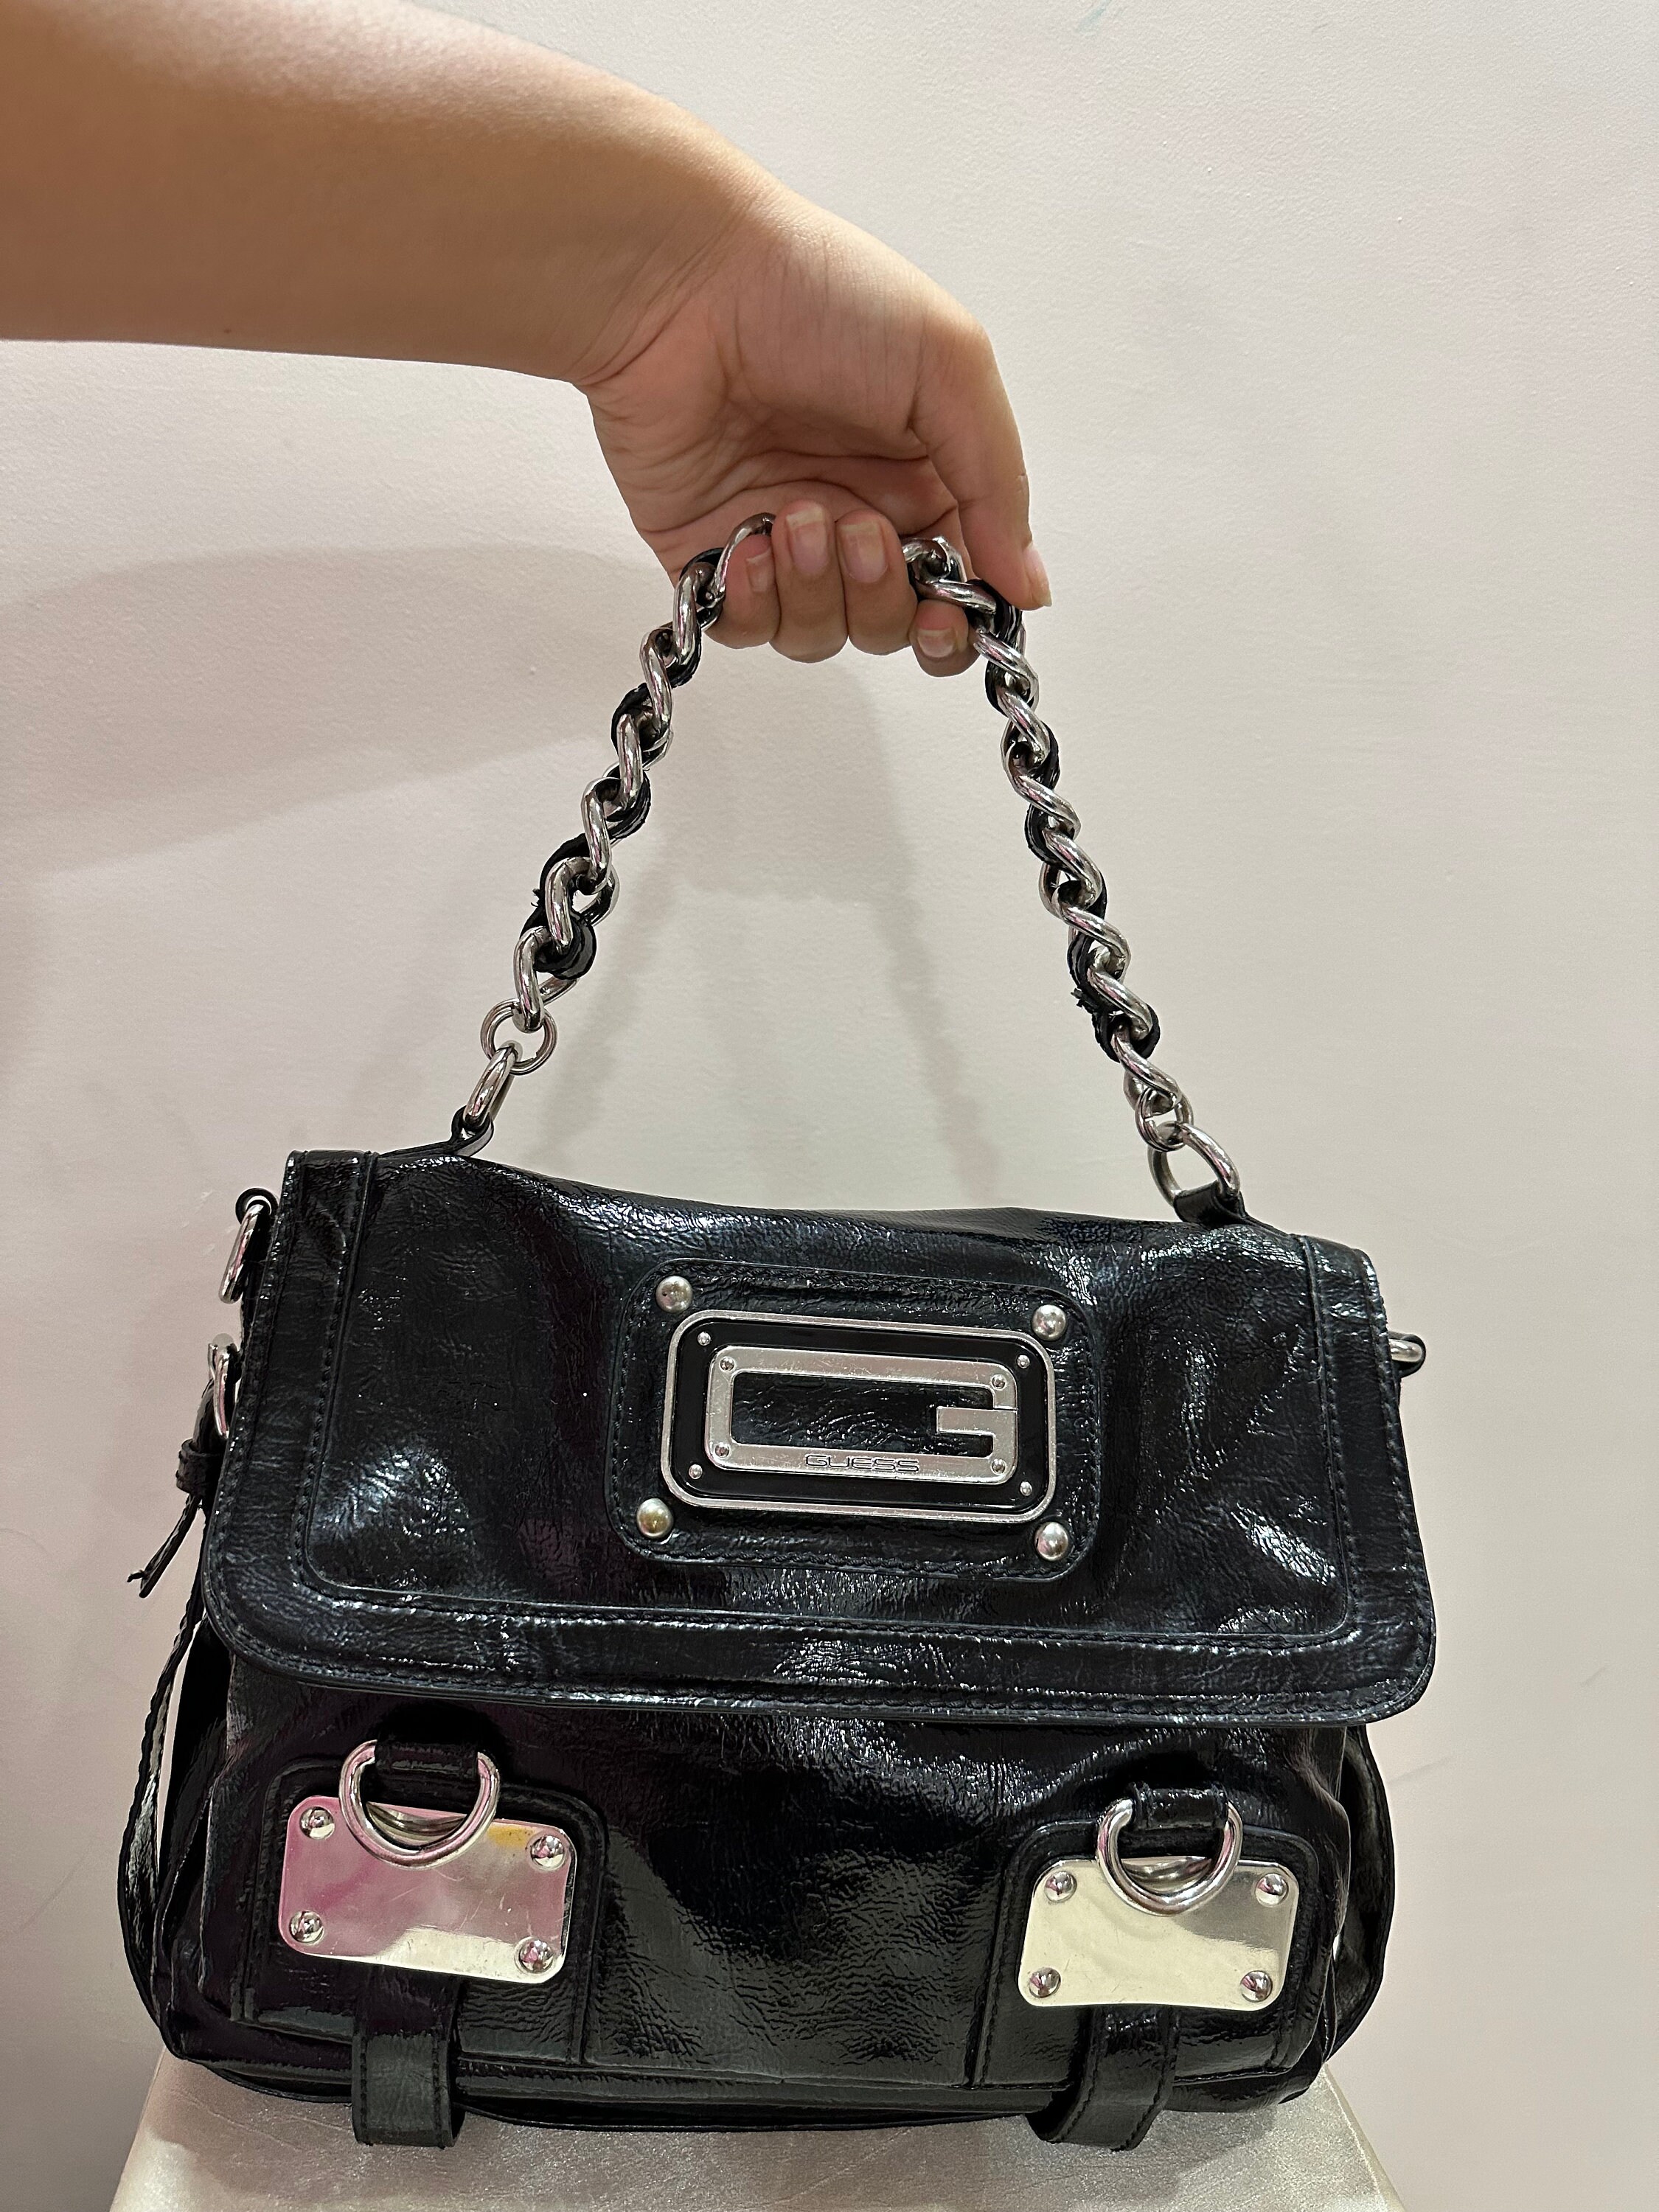 black guess handbags new collection